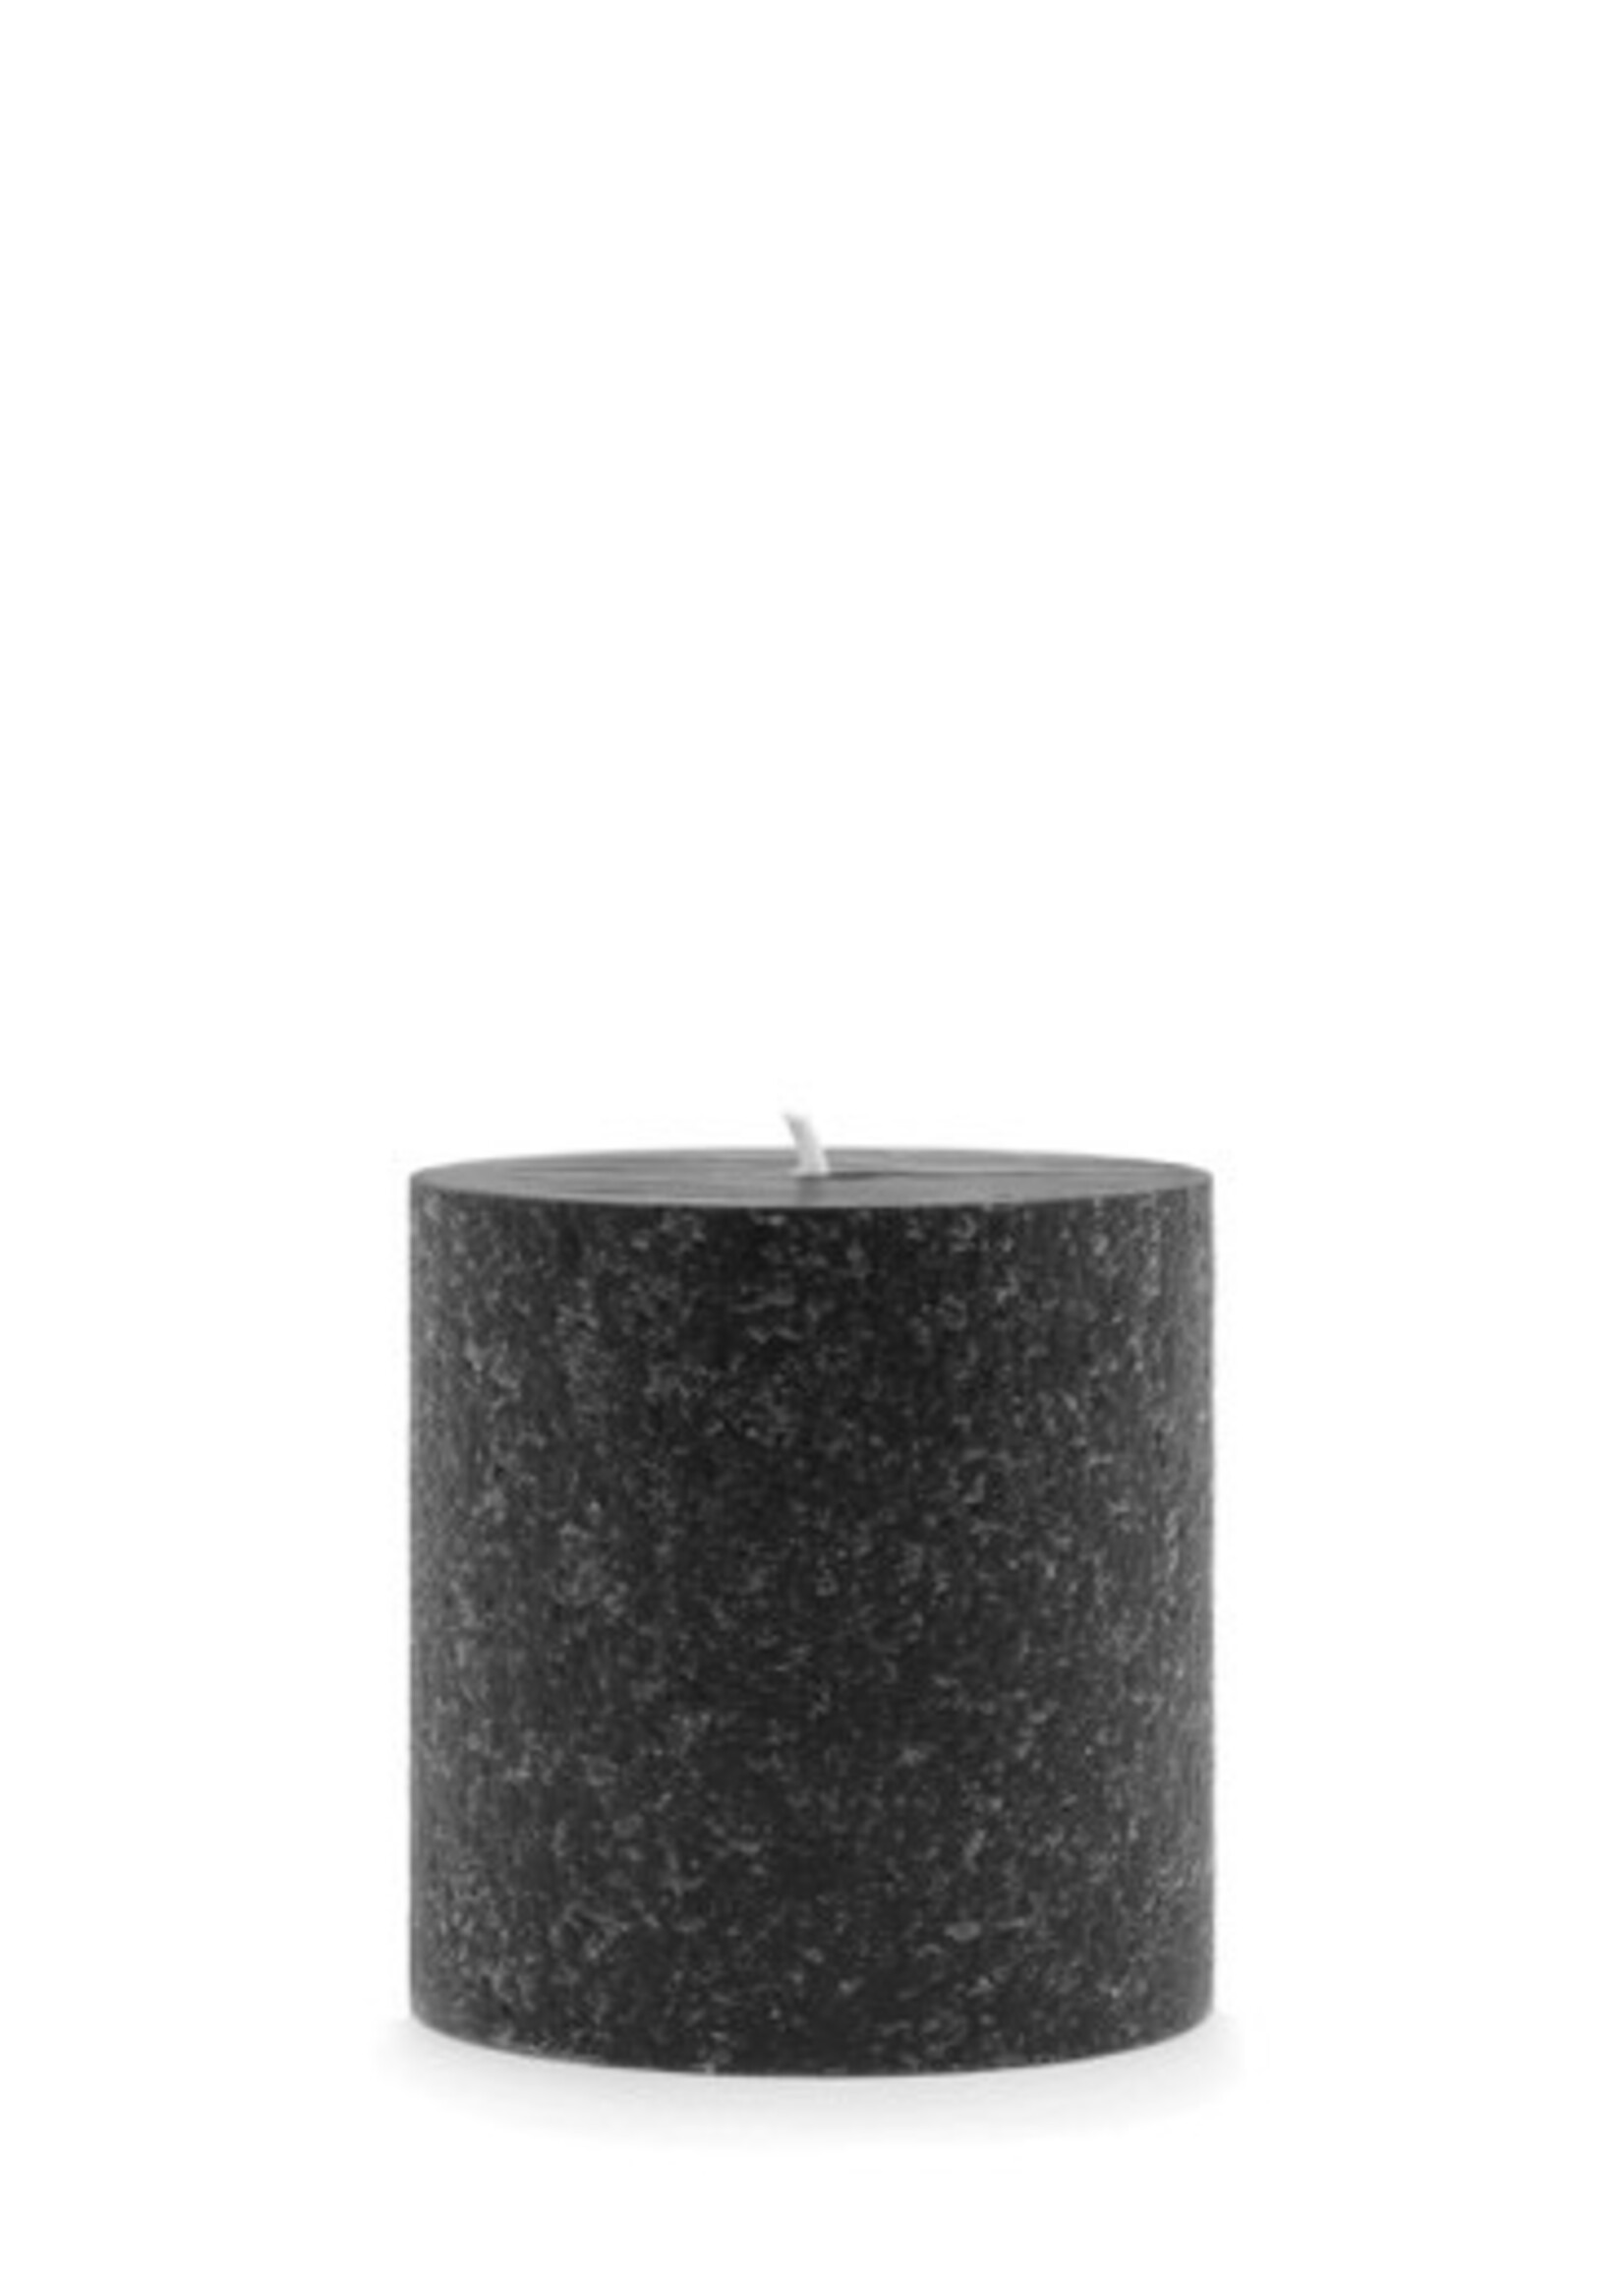 Root Candles Unscented pillar candles 3" "Timberline" by Root Candles